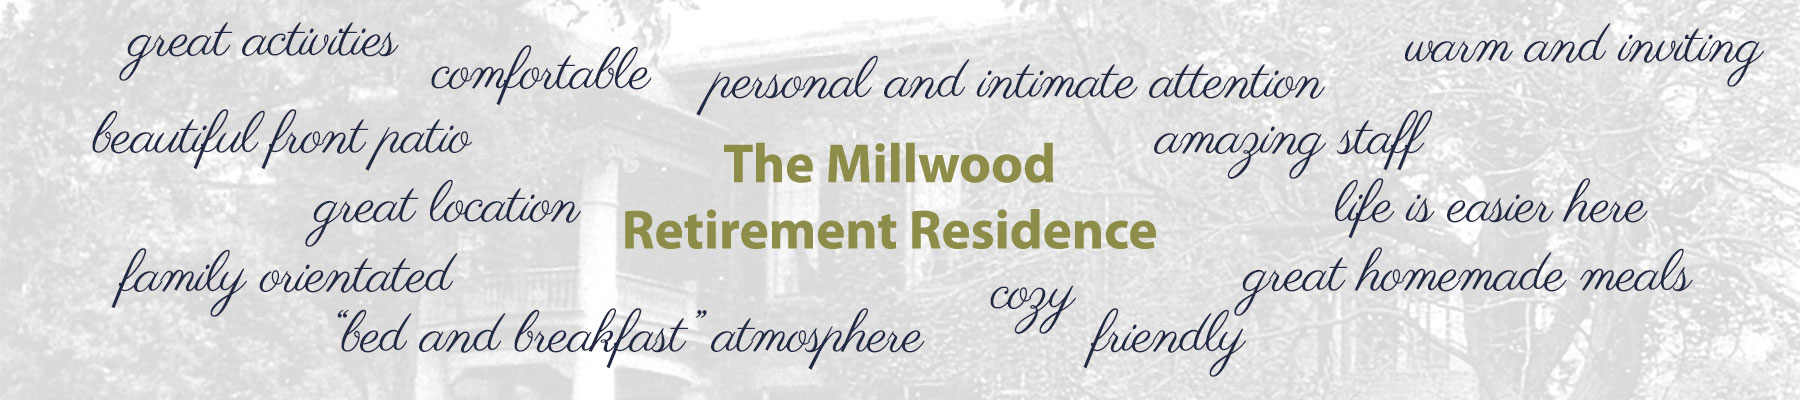 The Millwood Retirement Residence | Friendly, cozy, family orientated, great homemade meals, amazing staff, beautiful front patio, great activities, nice suites, inviting, warm, great location, comfortable